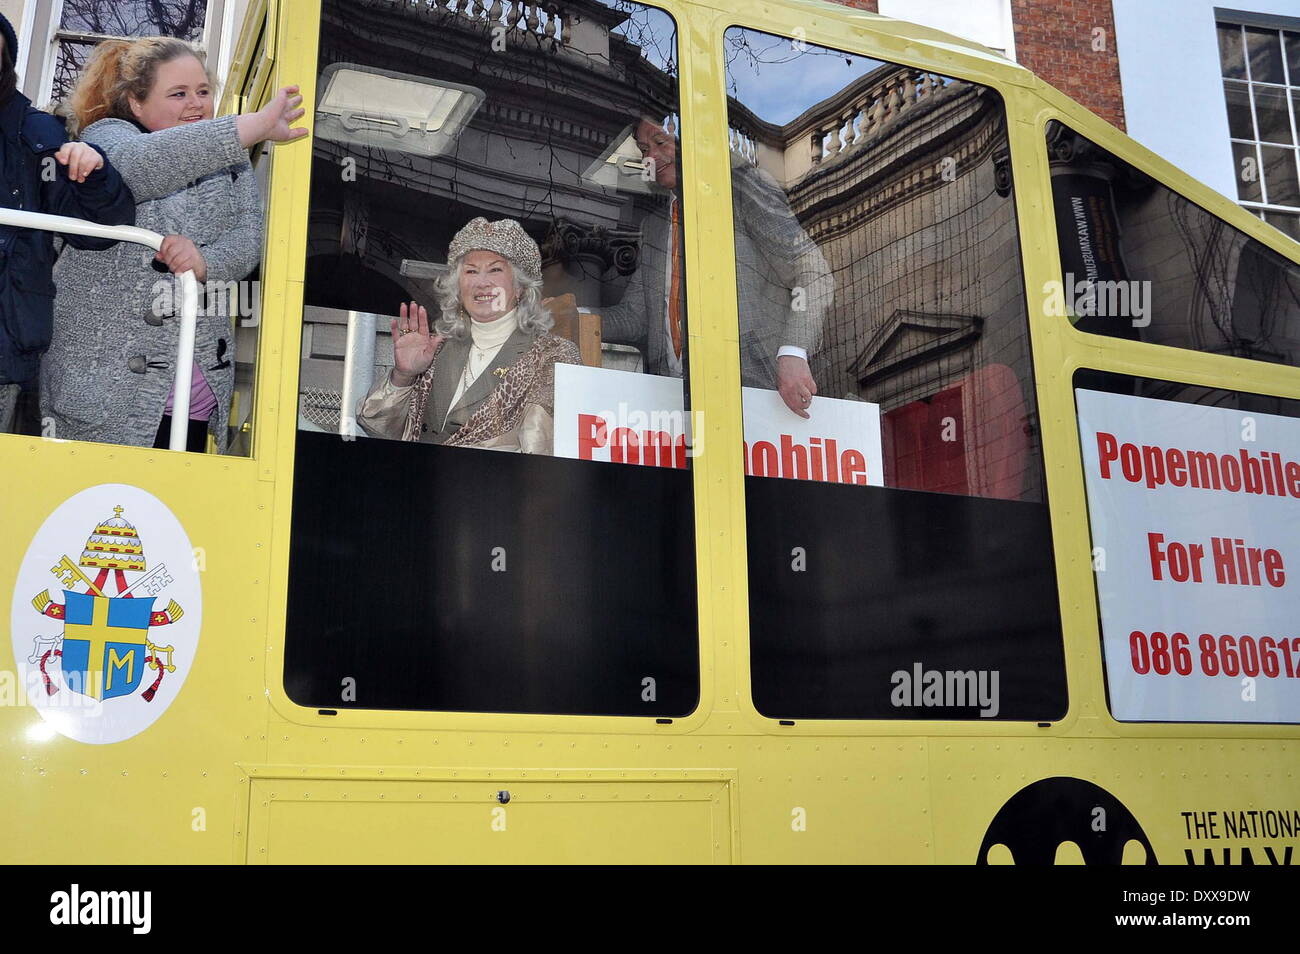 It was first used to enable Pope John Paul II to safely navigate the throngs who turned out for his historic visit to Ireland in 1979 but from today the iconic Popemobile will be available for hire for stag and hen parties and corporate gigs. The venture Stock Photo